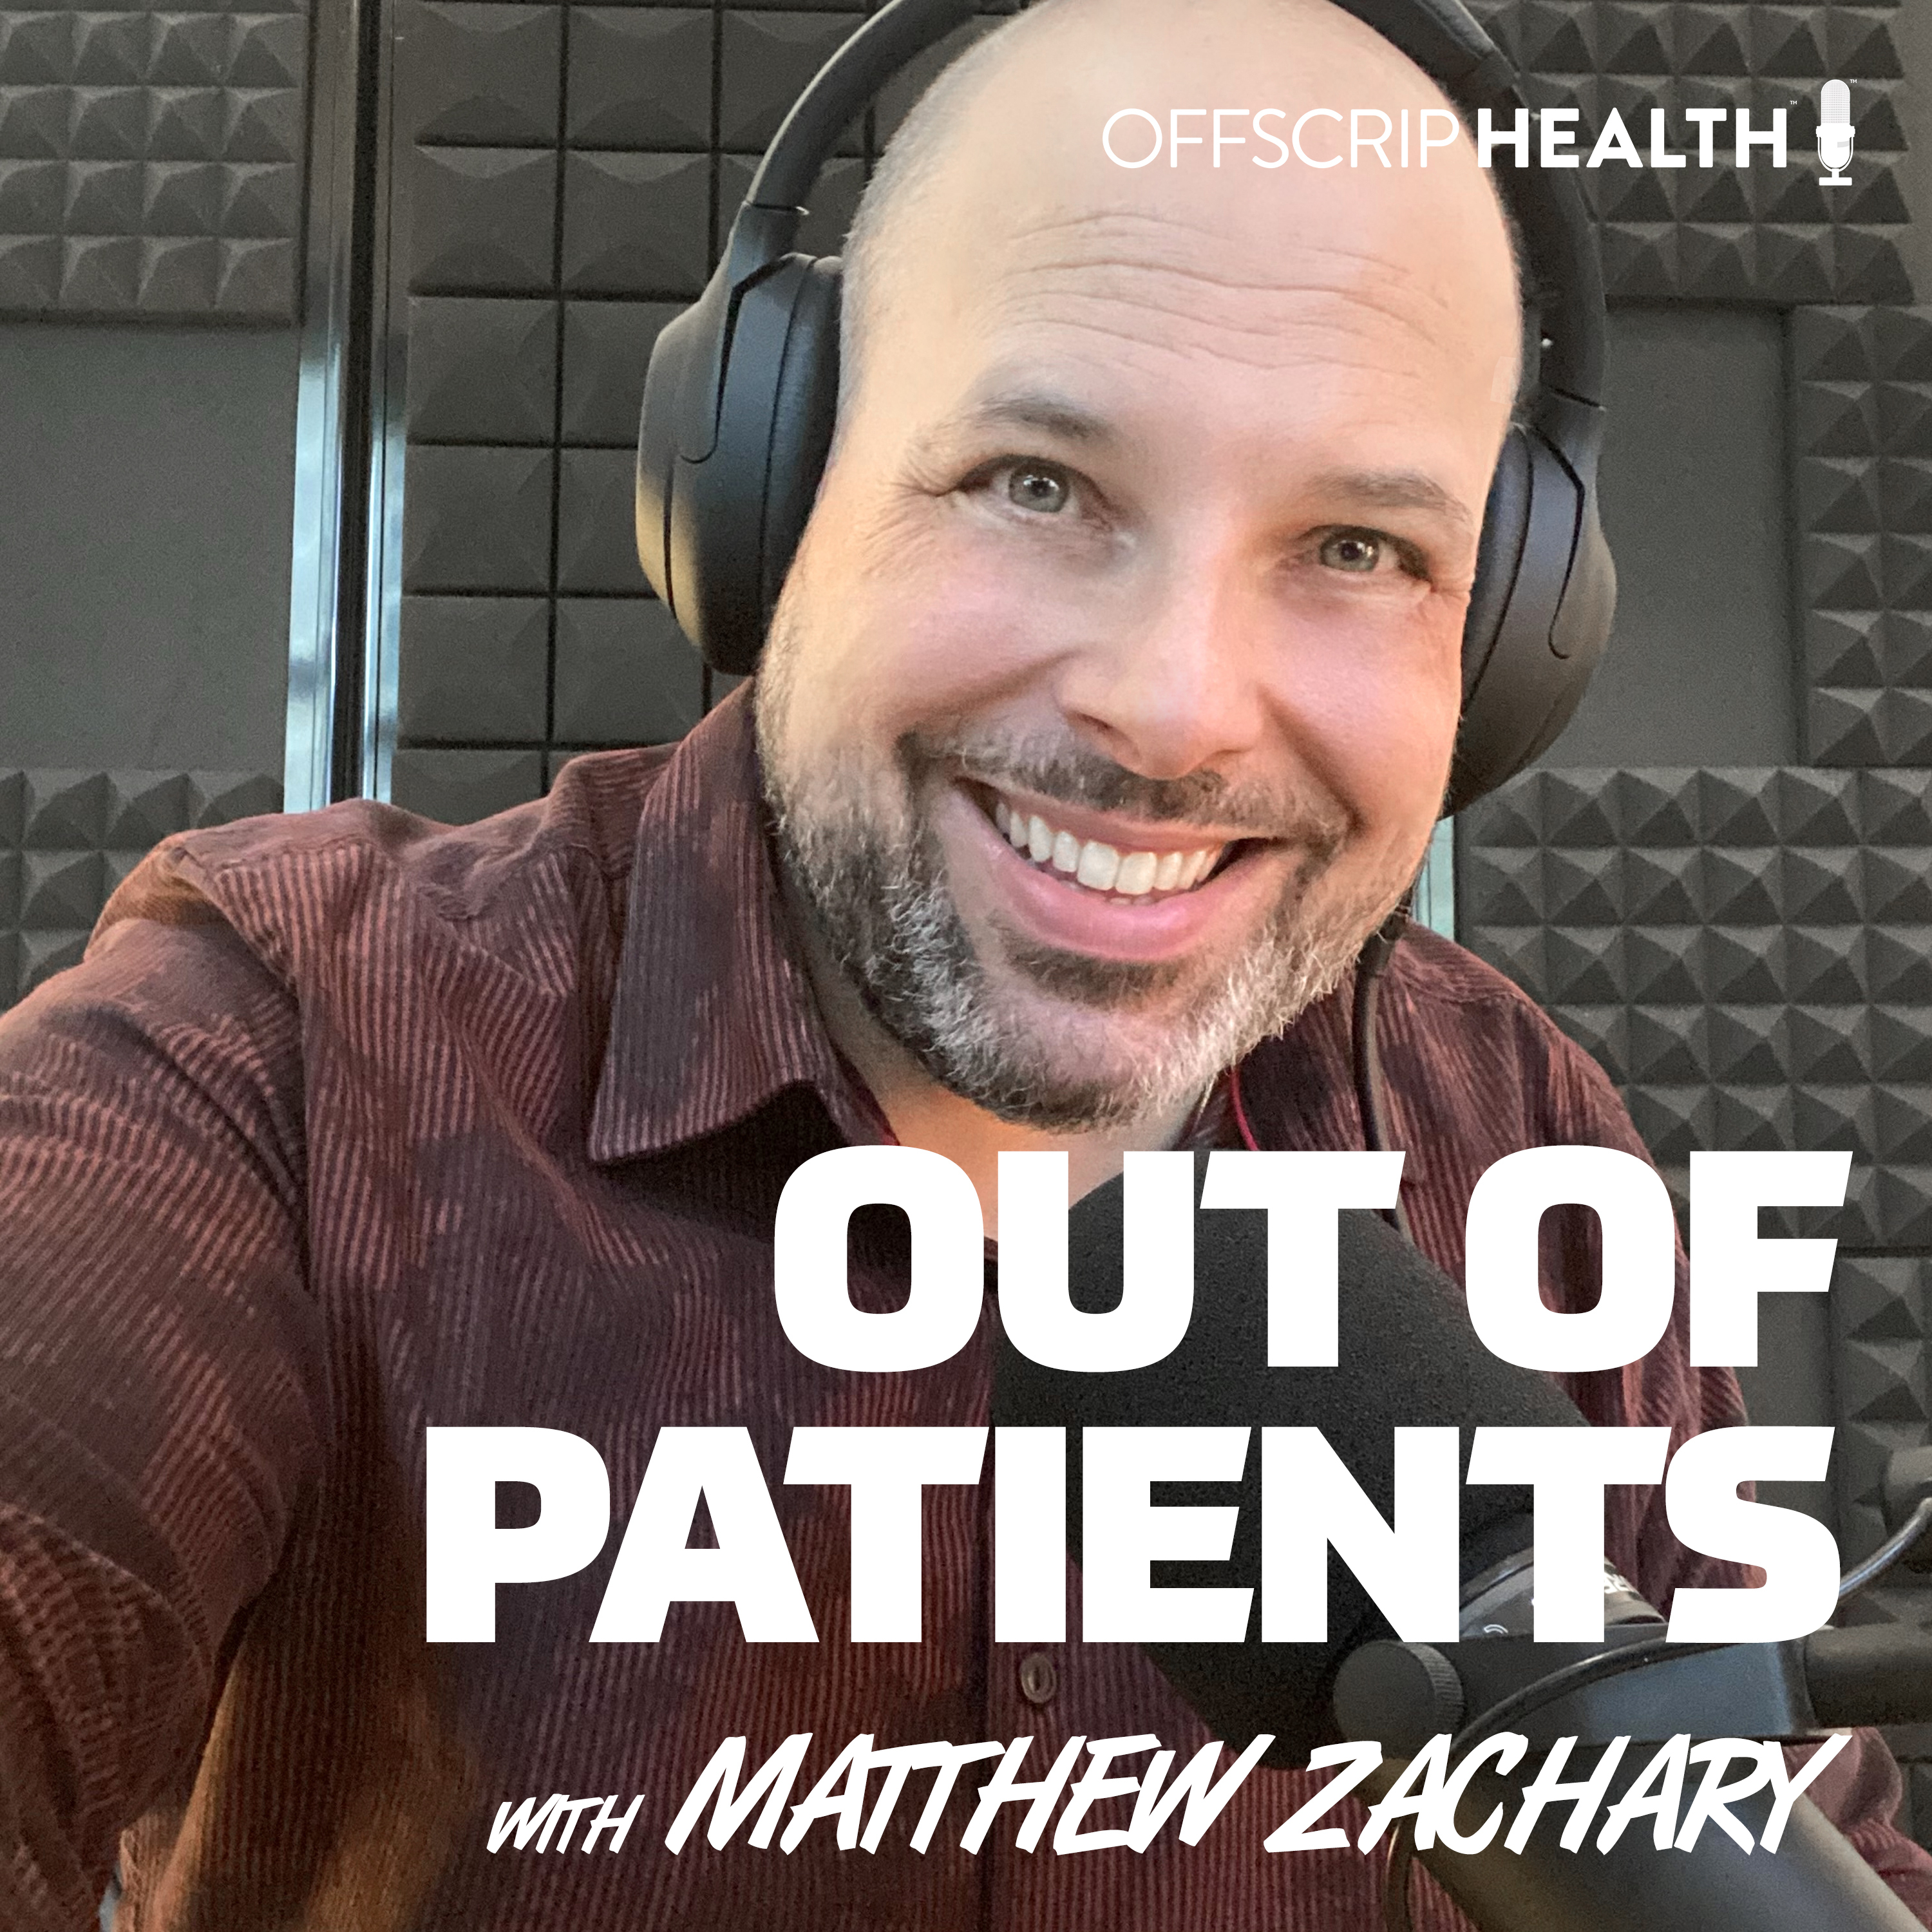 [THROWBACK] Pay the Patients: It’s Time to Compen$ate Patients for Their Experience